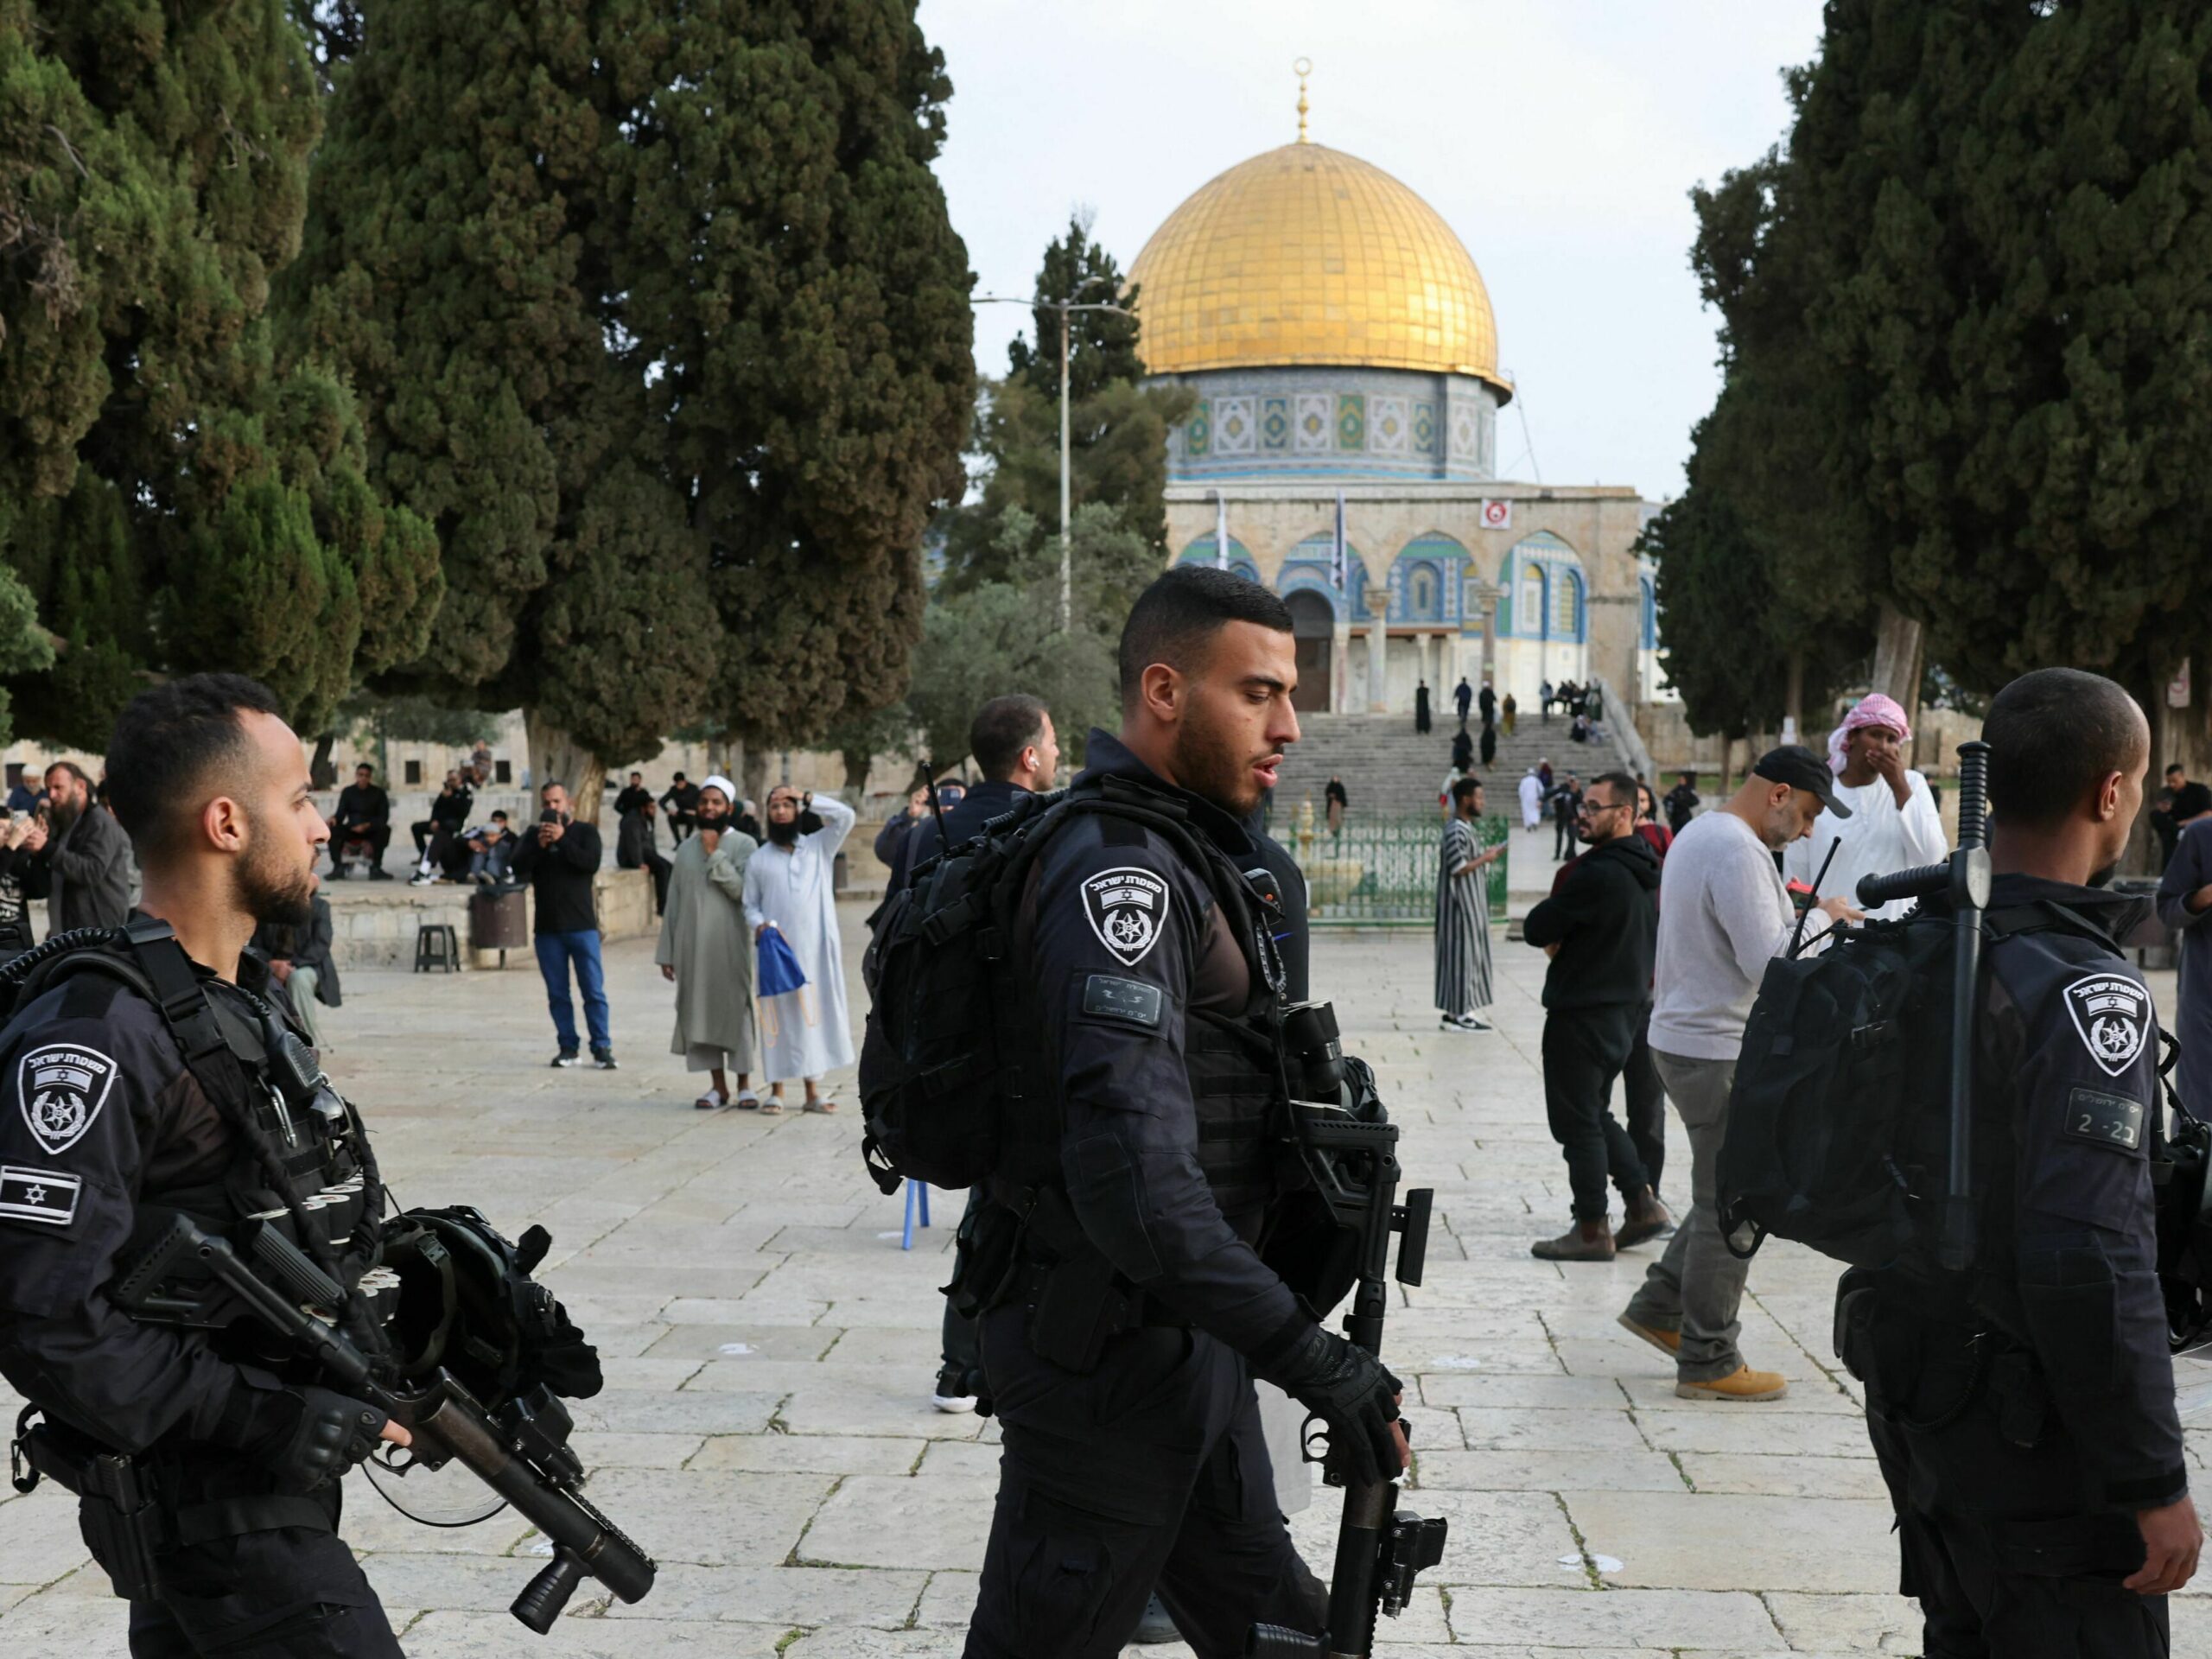 Jewish visitors walk protected by Israeli security forces at the Al-Aqsa mosque compound, also known as the Temple Mount complex to Jews, in Jerusalem on April 9, 2023, during the Muslim holy fasting month of Ramadan, also coinciding with the Jewish Passover holiday.